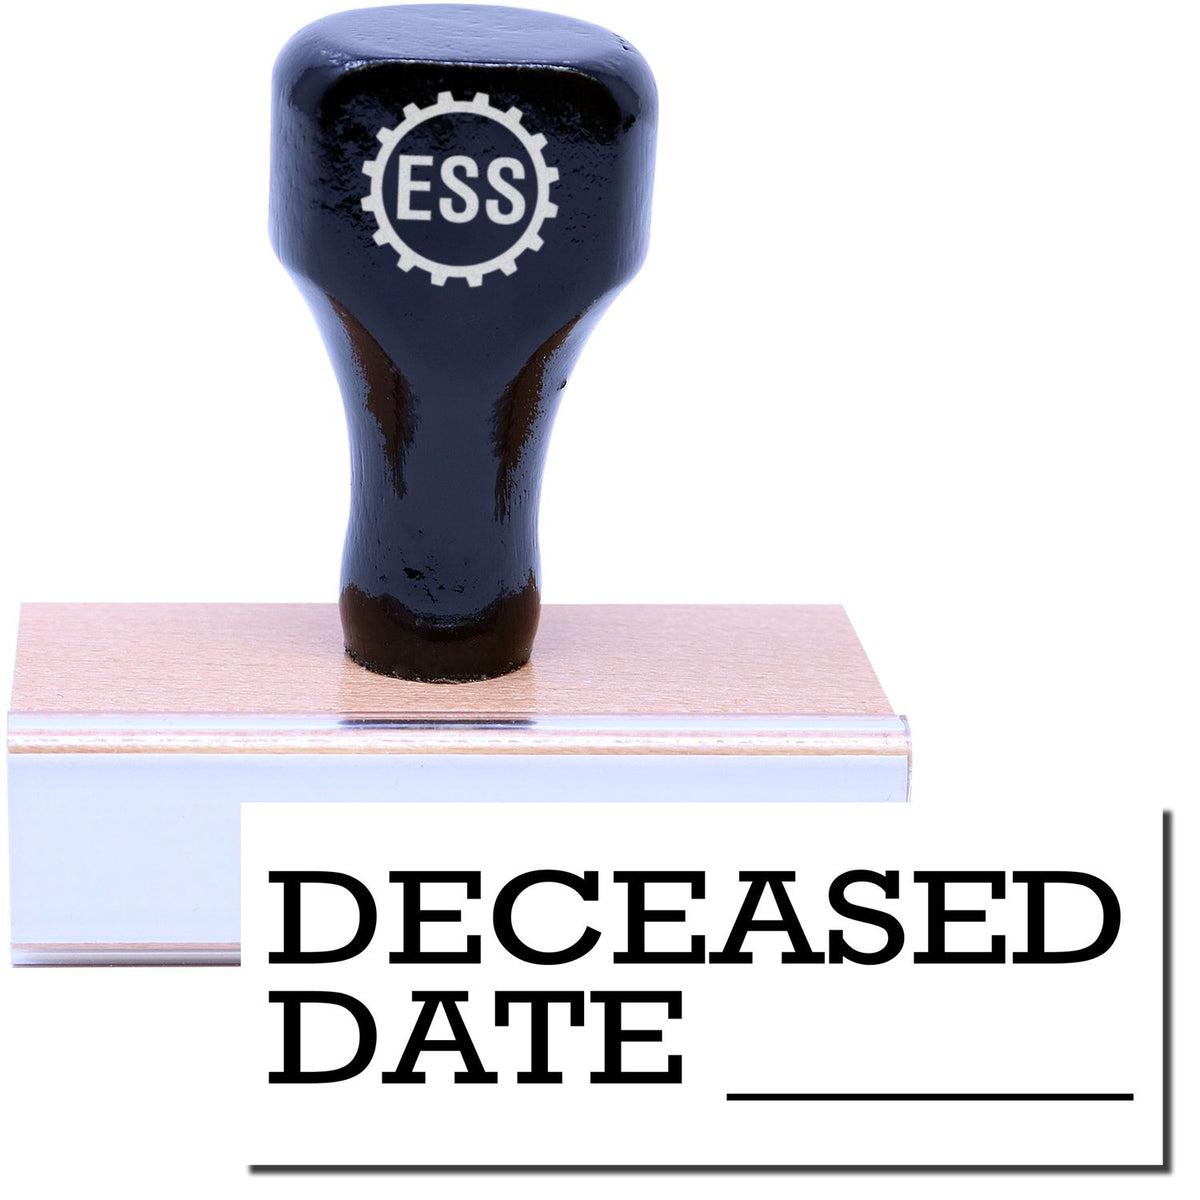 A stock office medical rubber stamp with a stamped image showing how the text &quot;DECEASED DATE&quot; with a line for writing date is displayed after stamping.